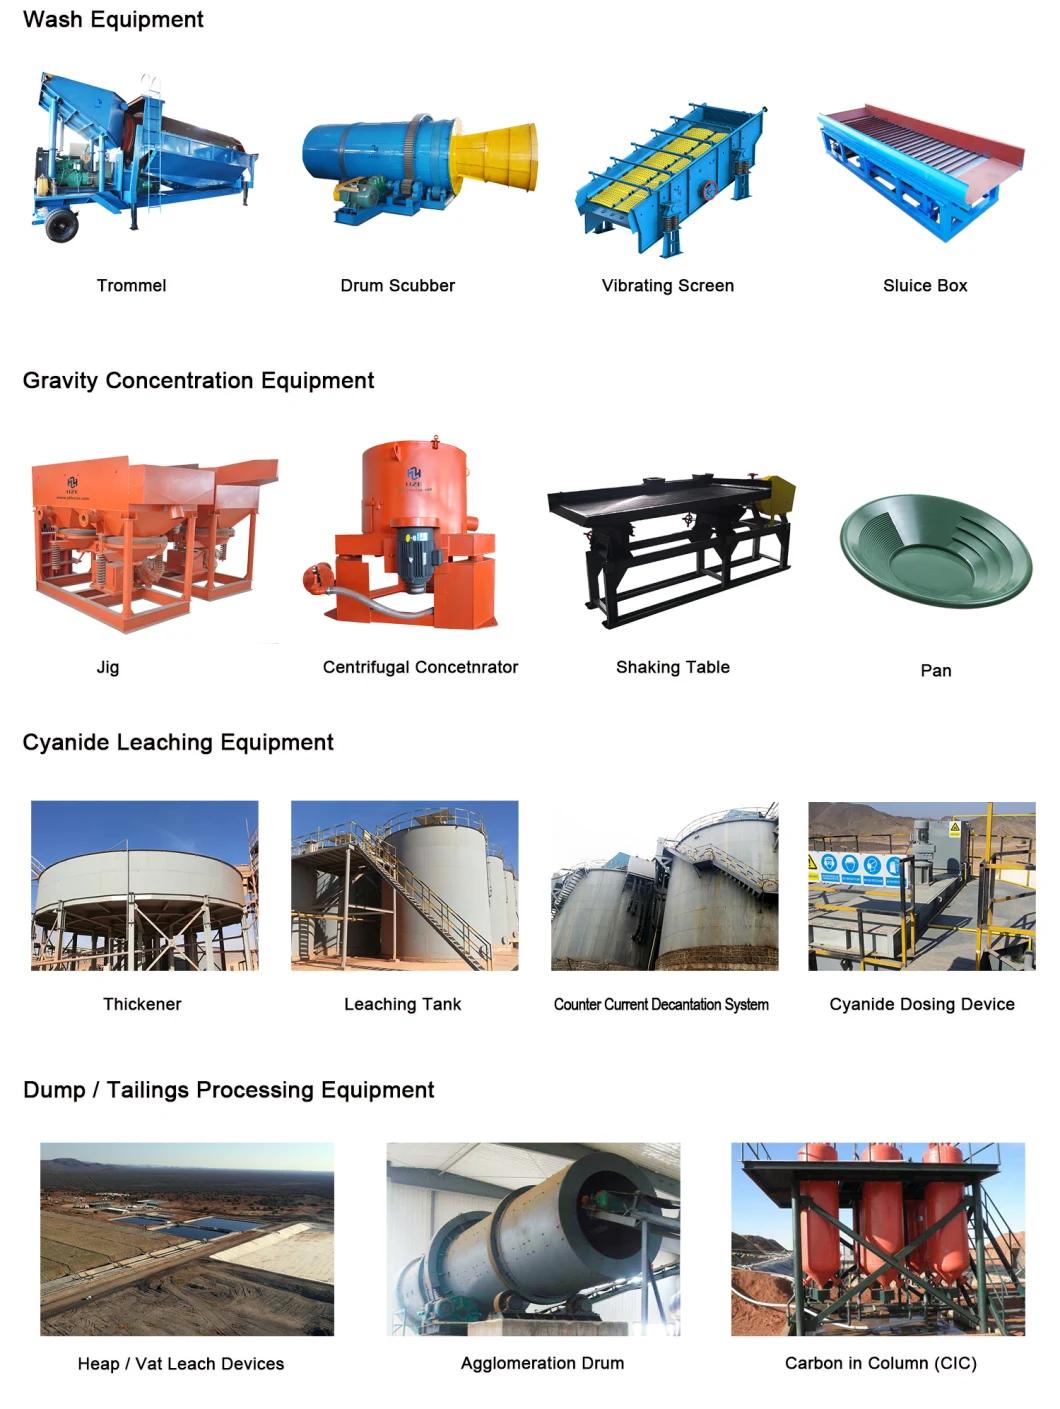 Alluvial / Eluvial / Placer / Gold Mining Wash Equipment